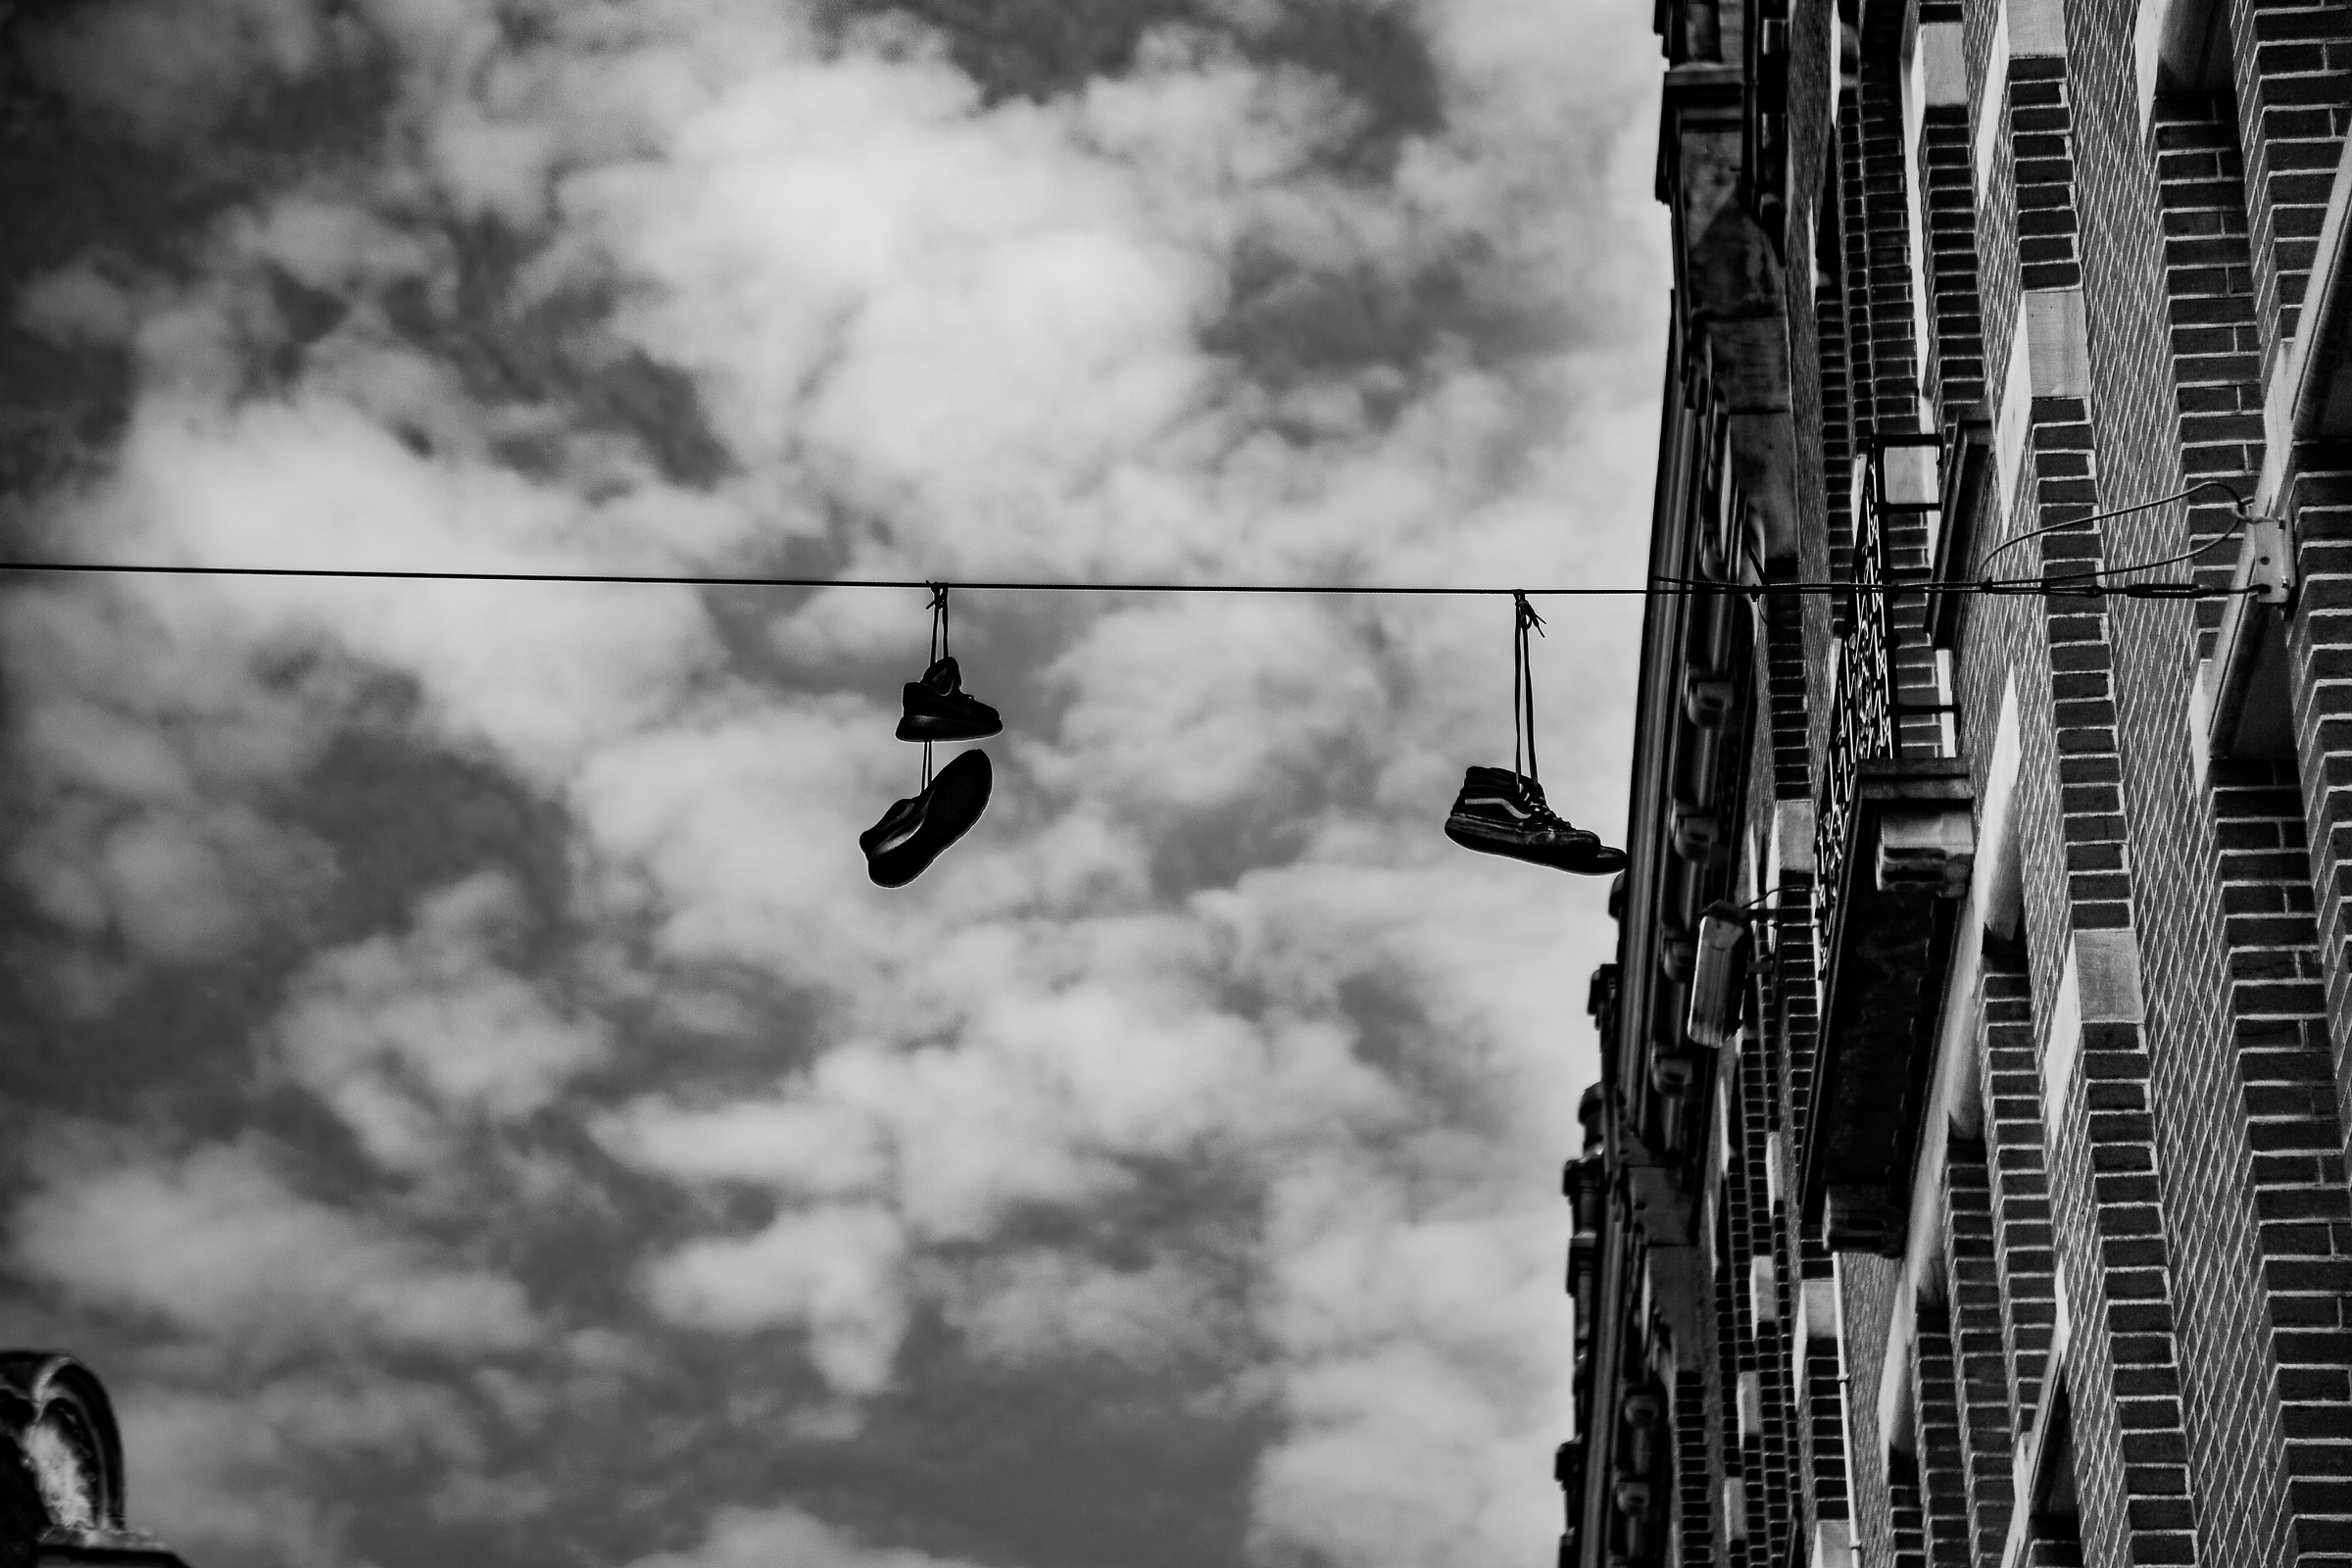 Hanging shoes...